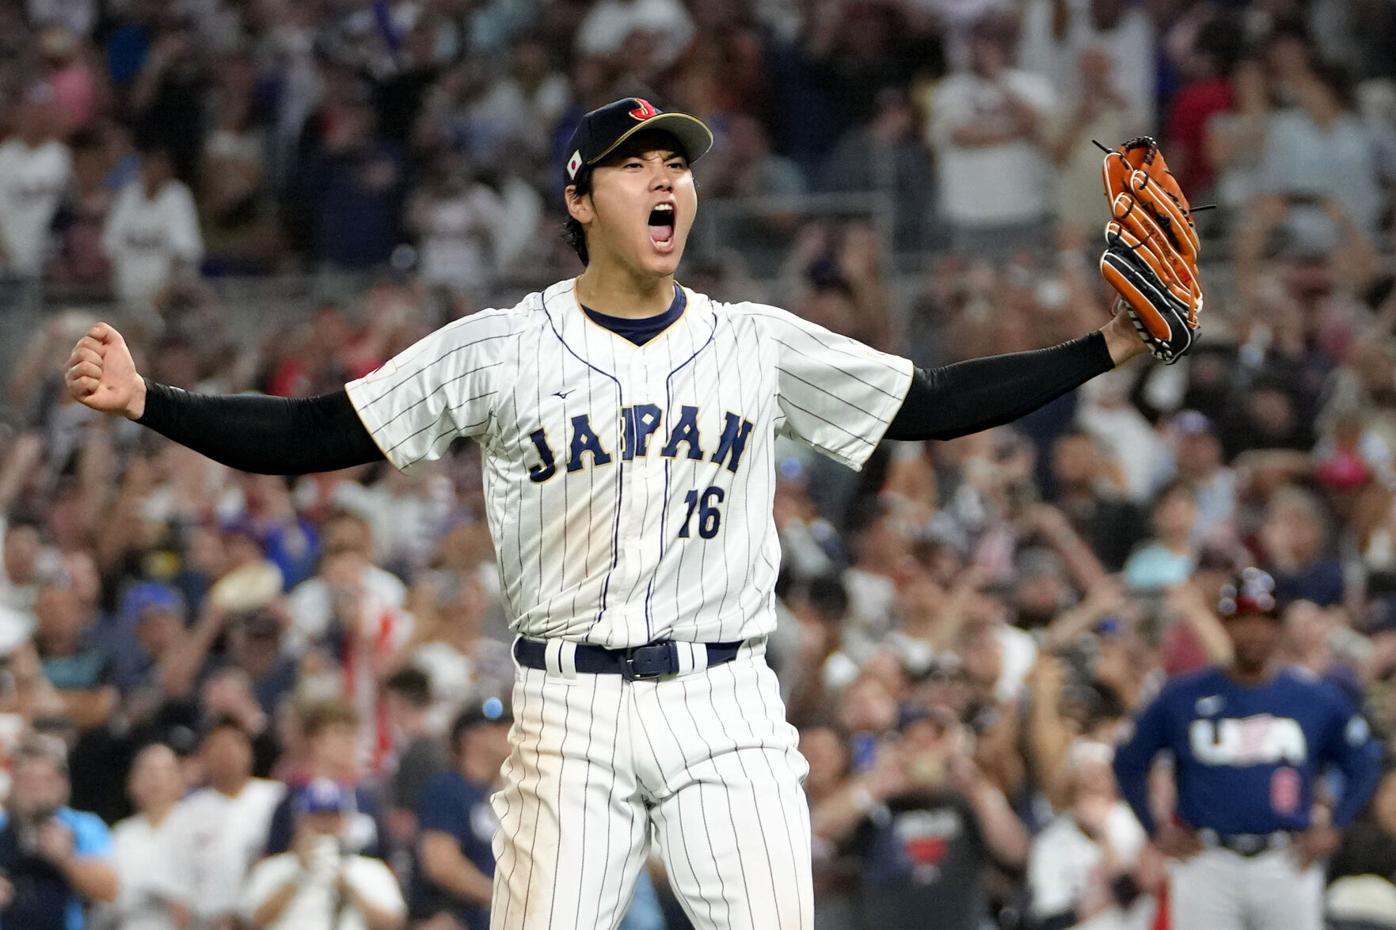 Two-way successes mounting for Ohtani